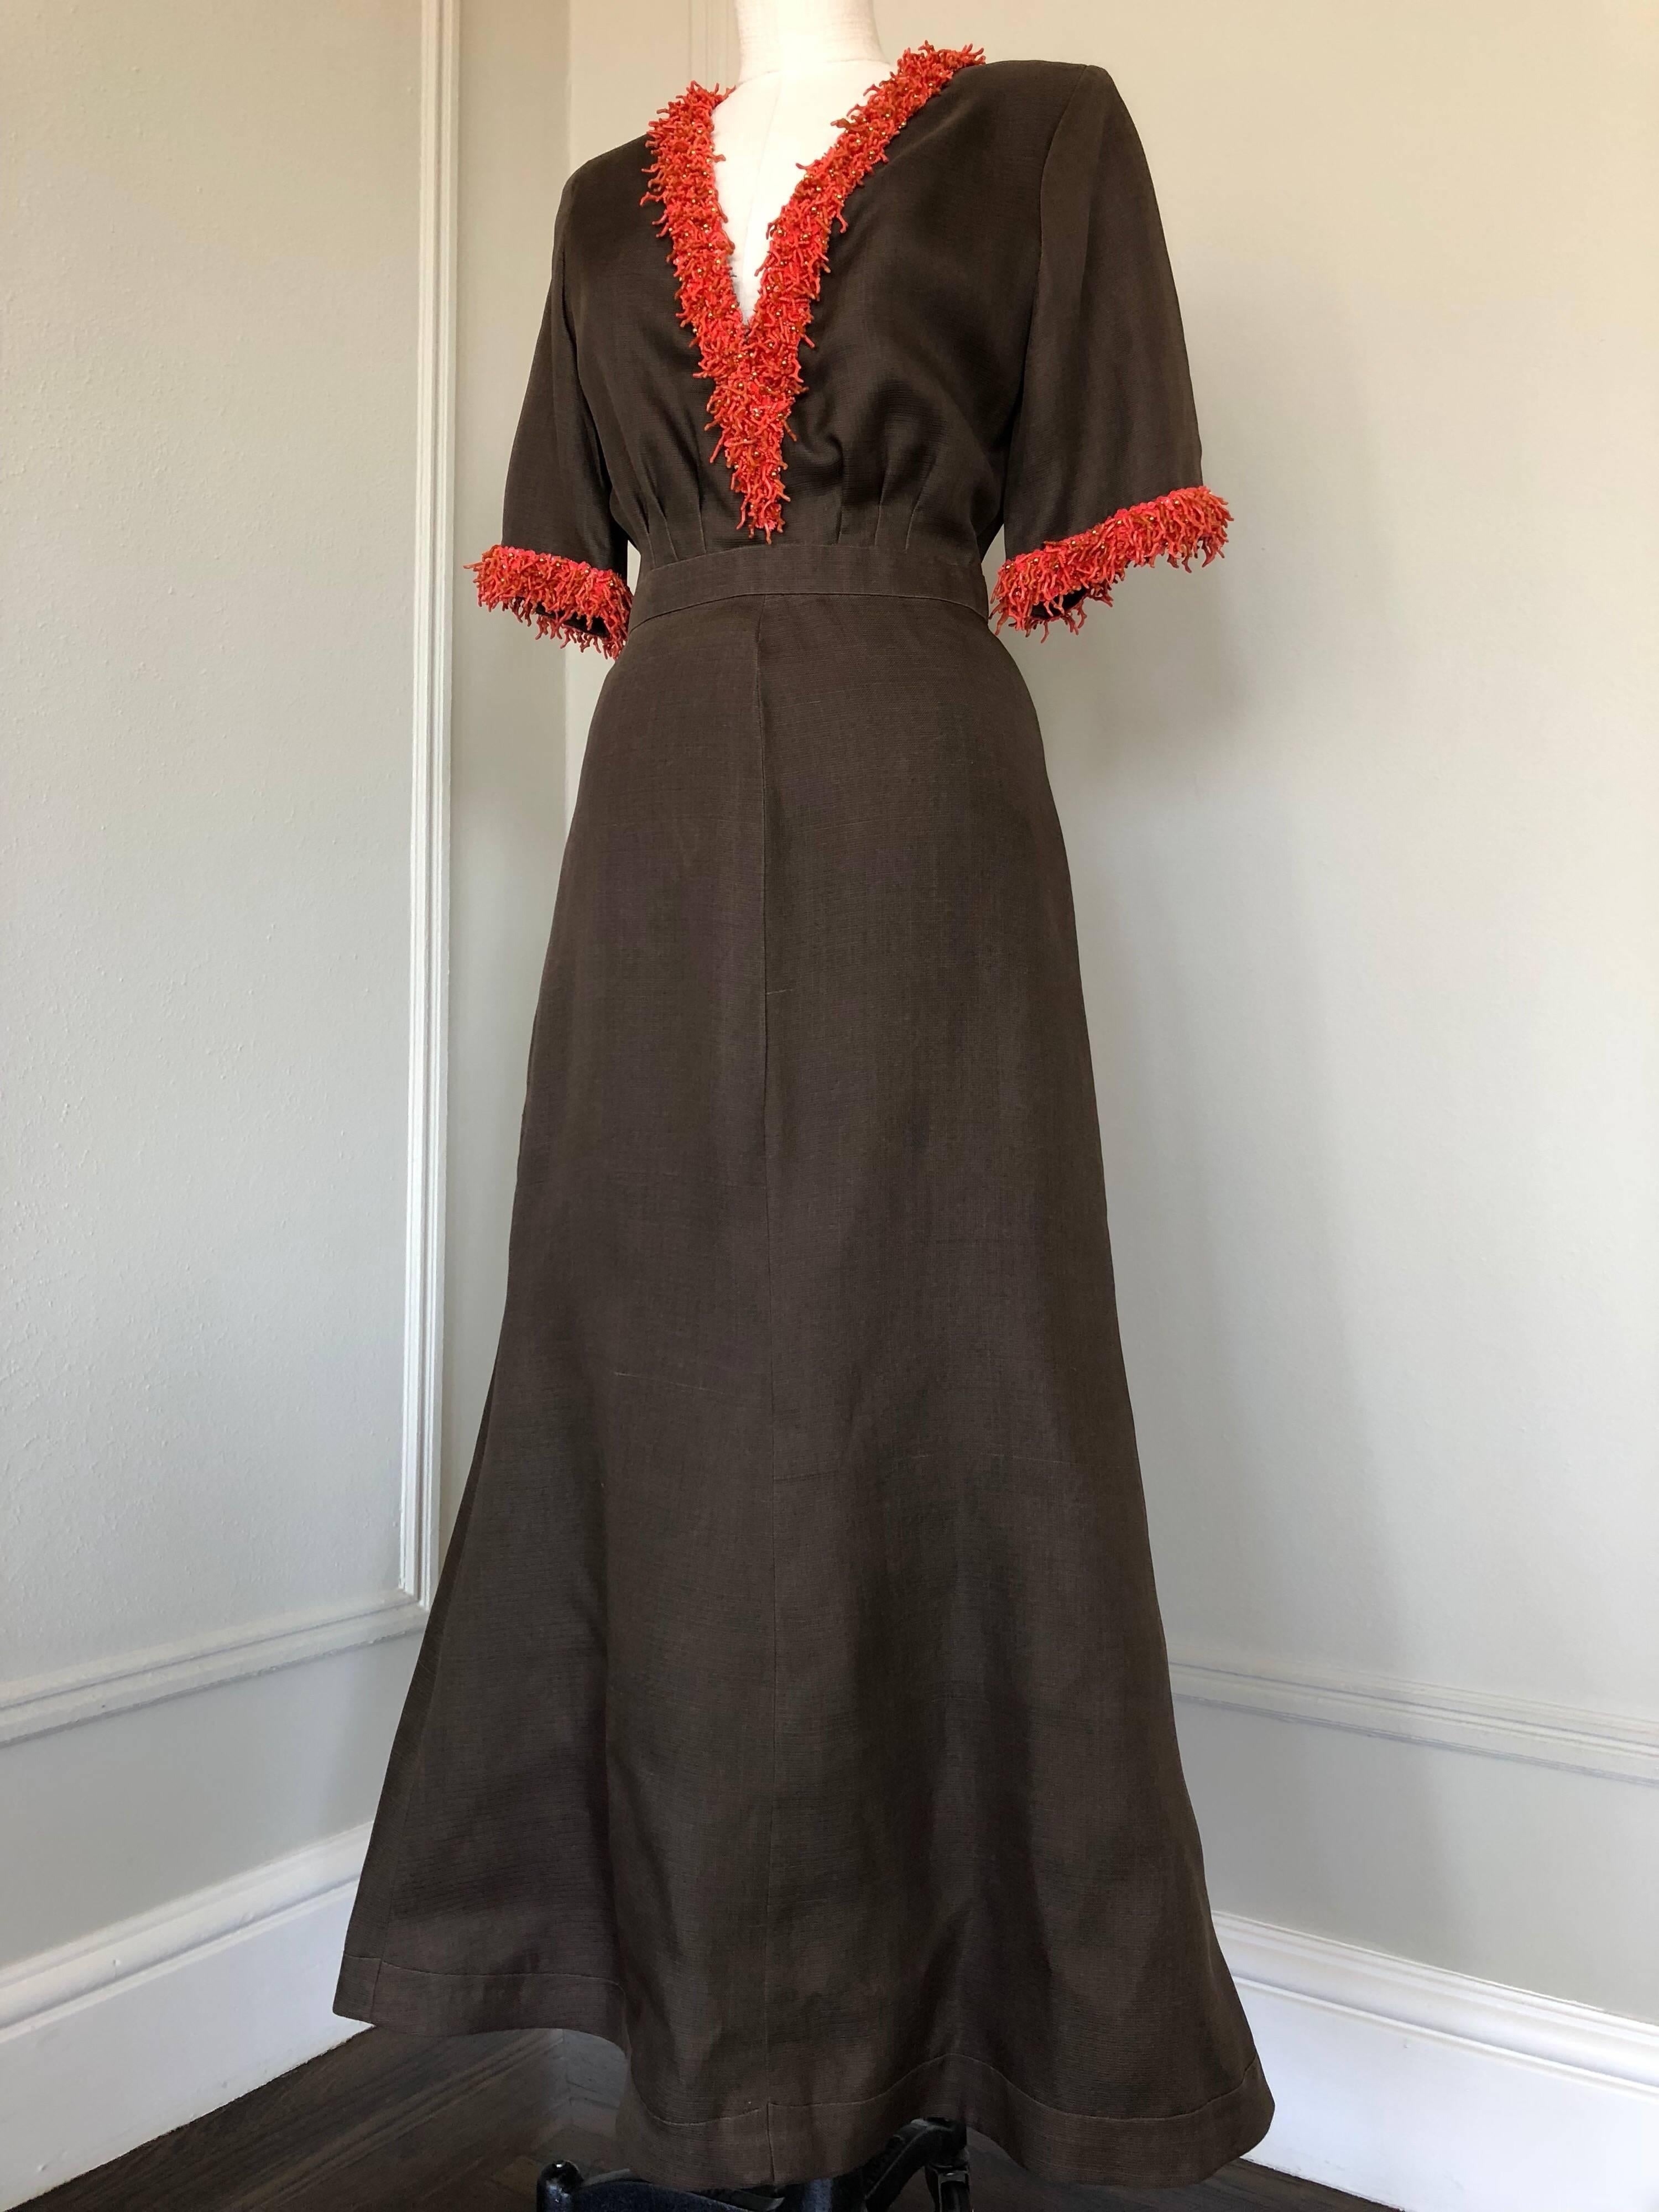 A very elegant Nina Ricci Couture Summer gown in rich chocolate silk Gazar fabric is smartly tailored to enhance the shape of this crisp design. The design features elbow length sleeves a fitted banded waist and a slightly flared hemline. The deep V